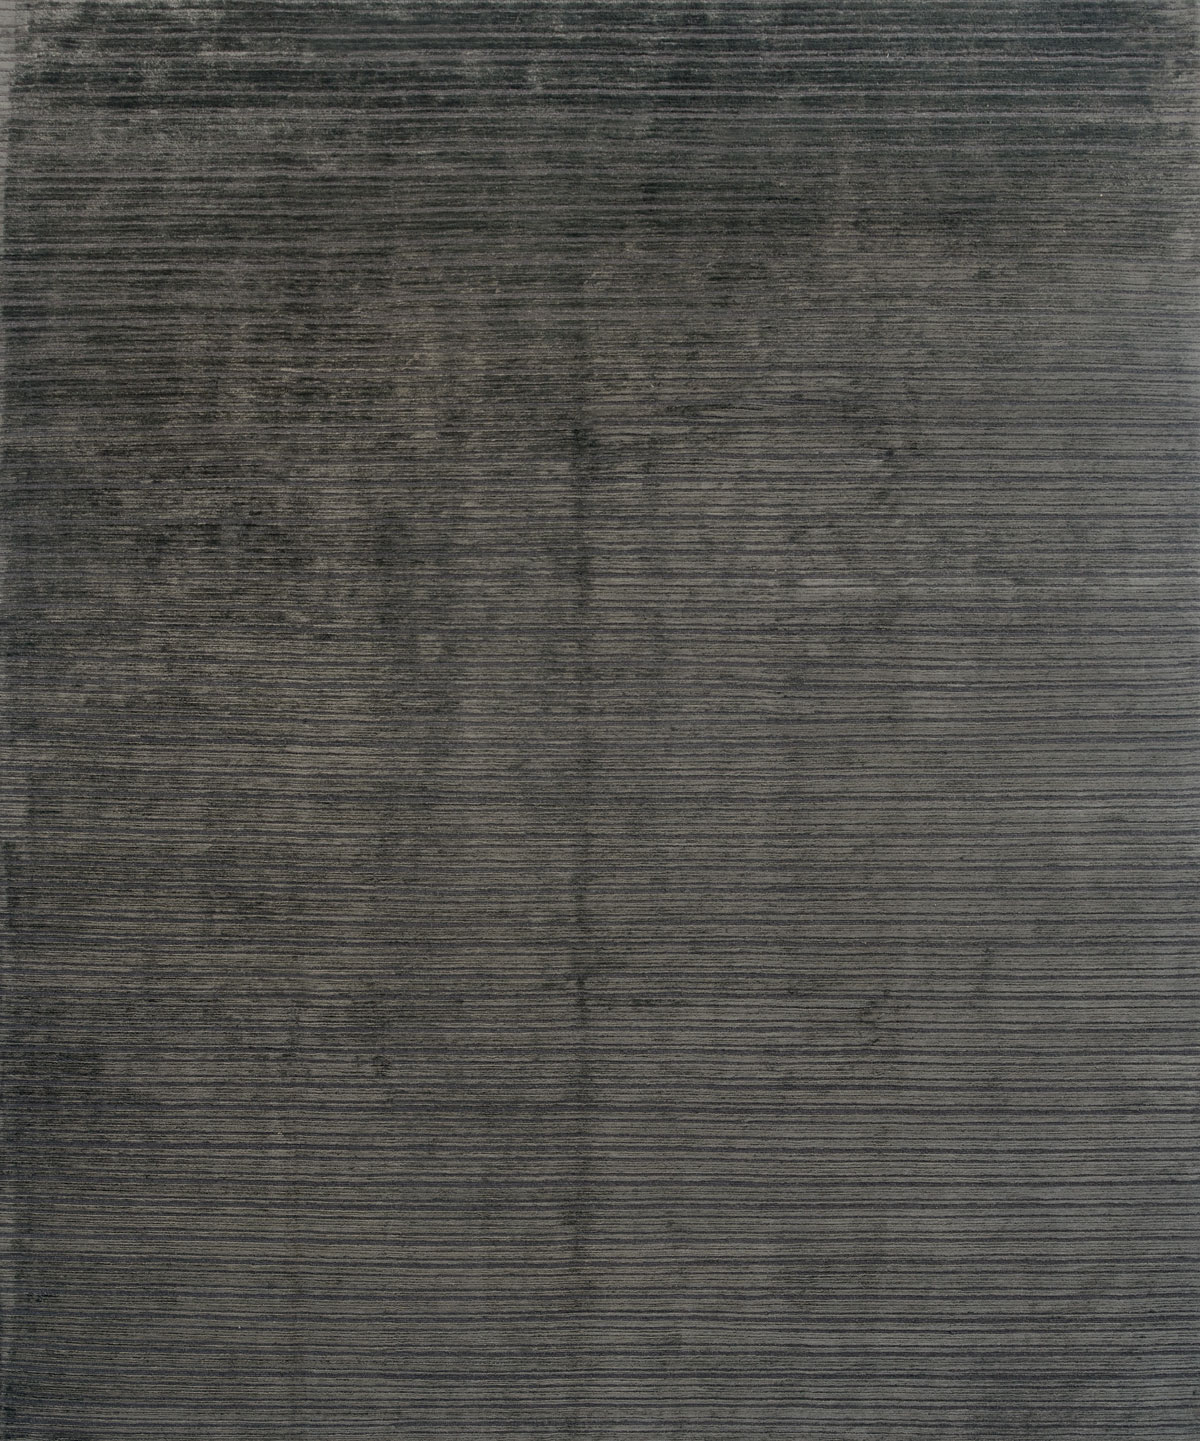 Eccelso Antracite Handknotted Rug ☞ Size: 300 x 300 cm